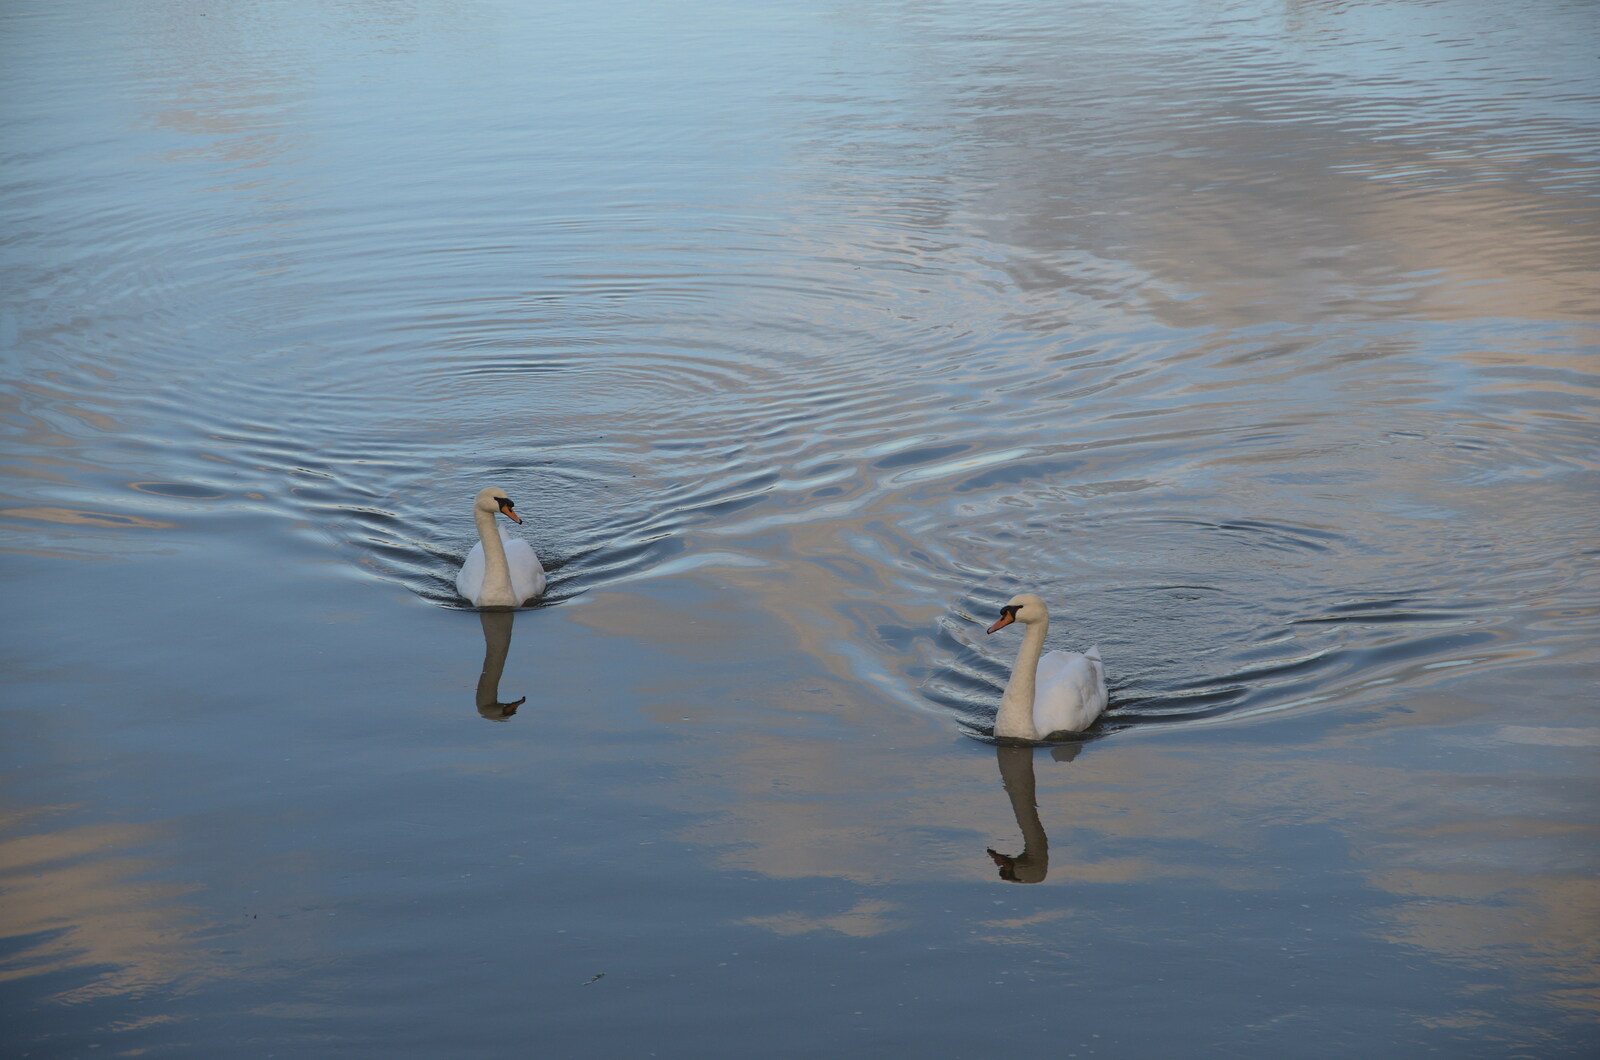 A Postcard from Flatford and Dedham, Suffolk and Essex, 9th November 2022: A pair of swans pootle around